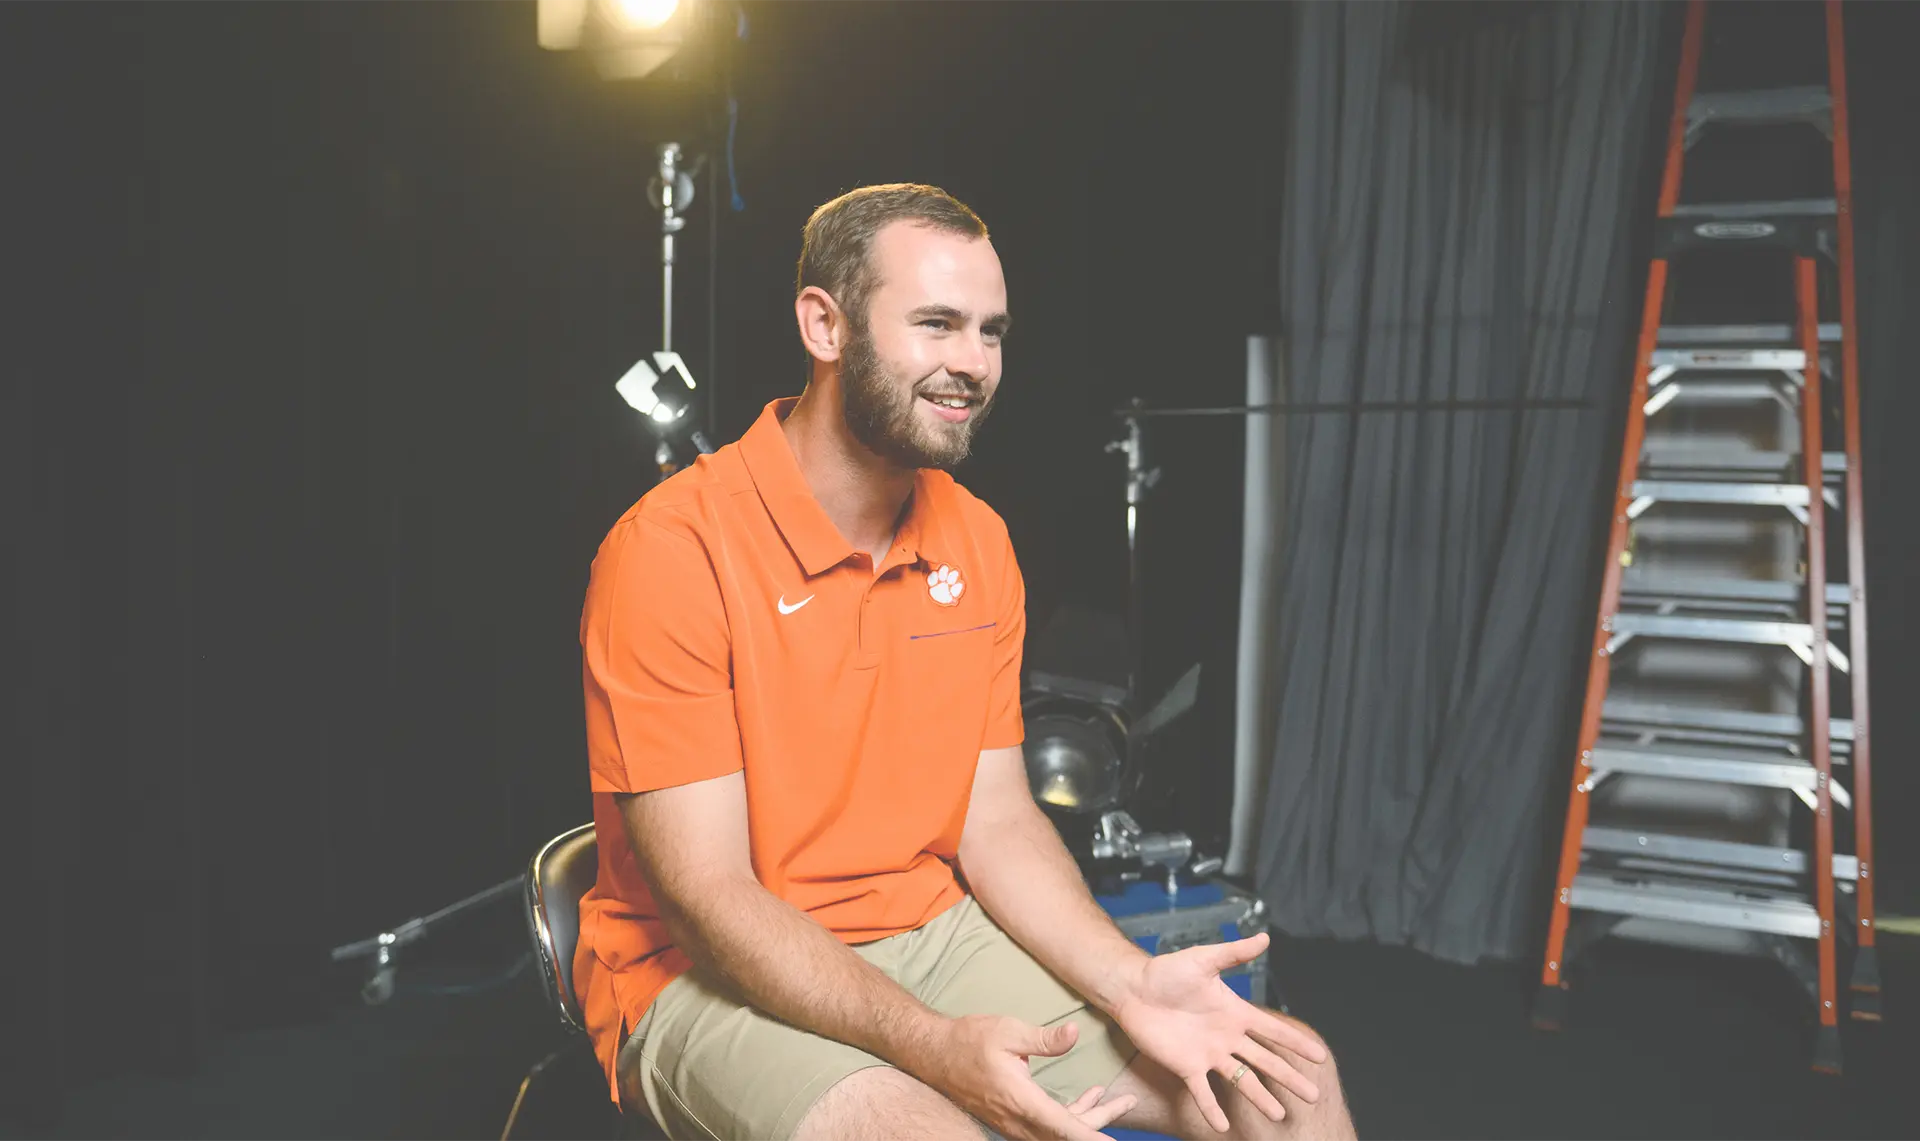 Hunter Renfrow sits in a backstage video area speaking to the Camera.